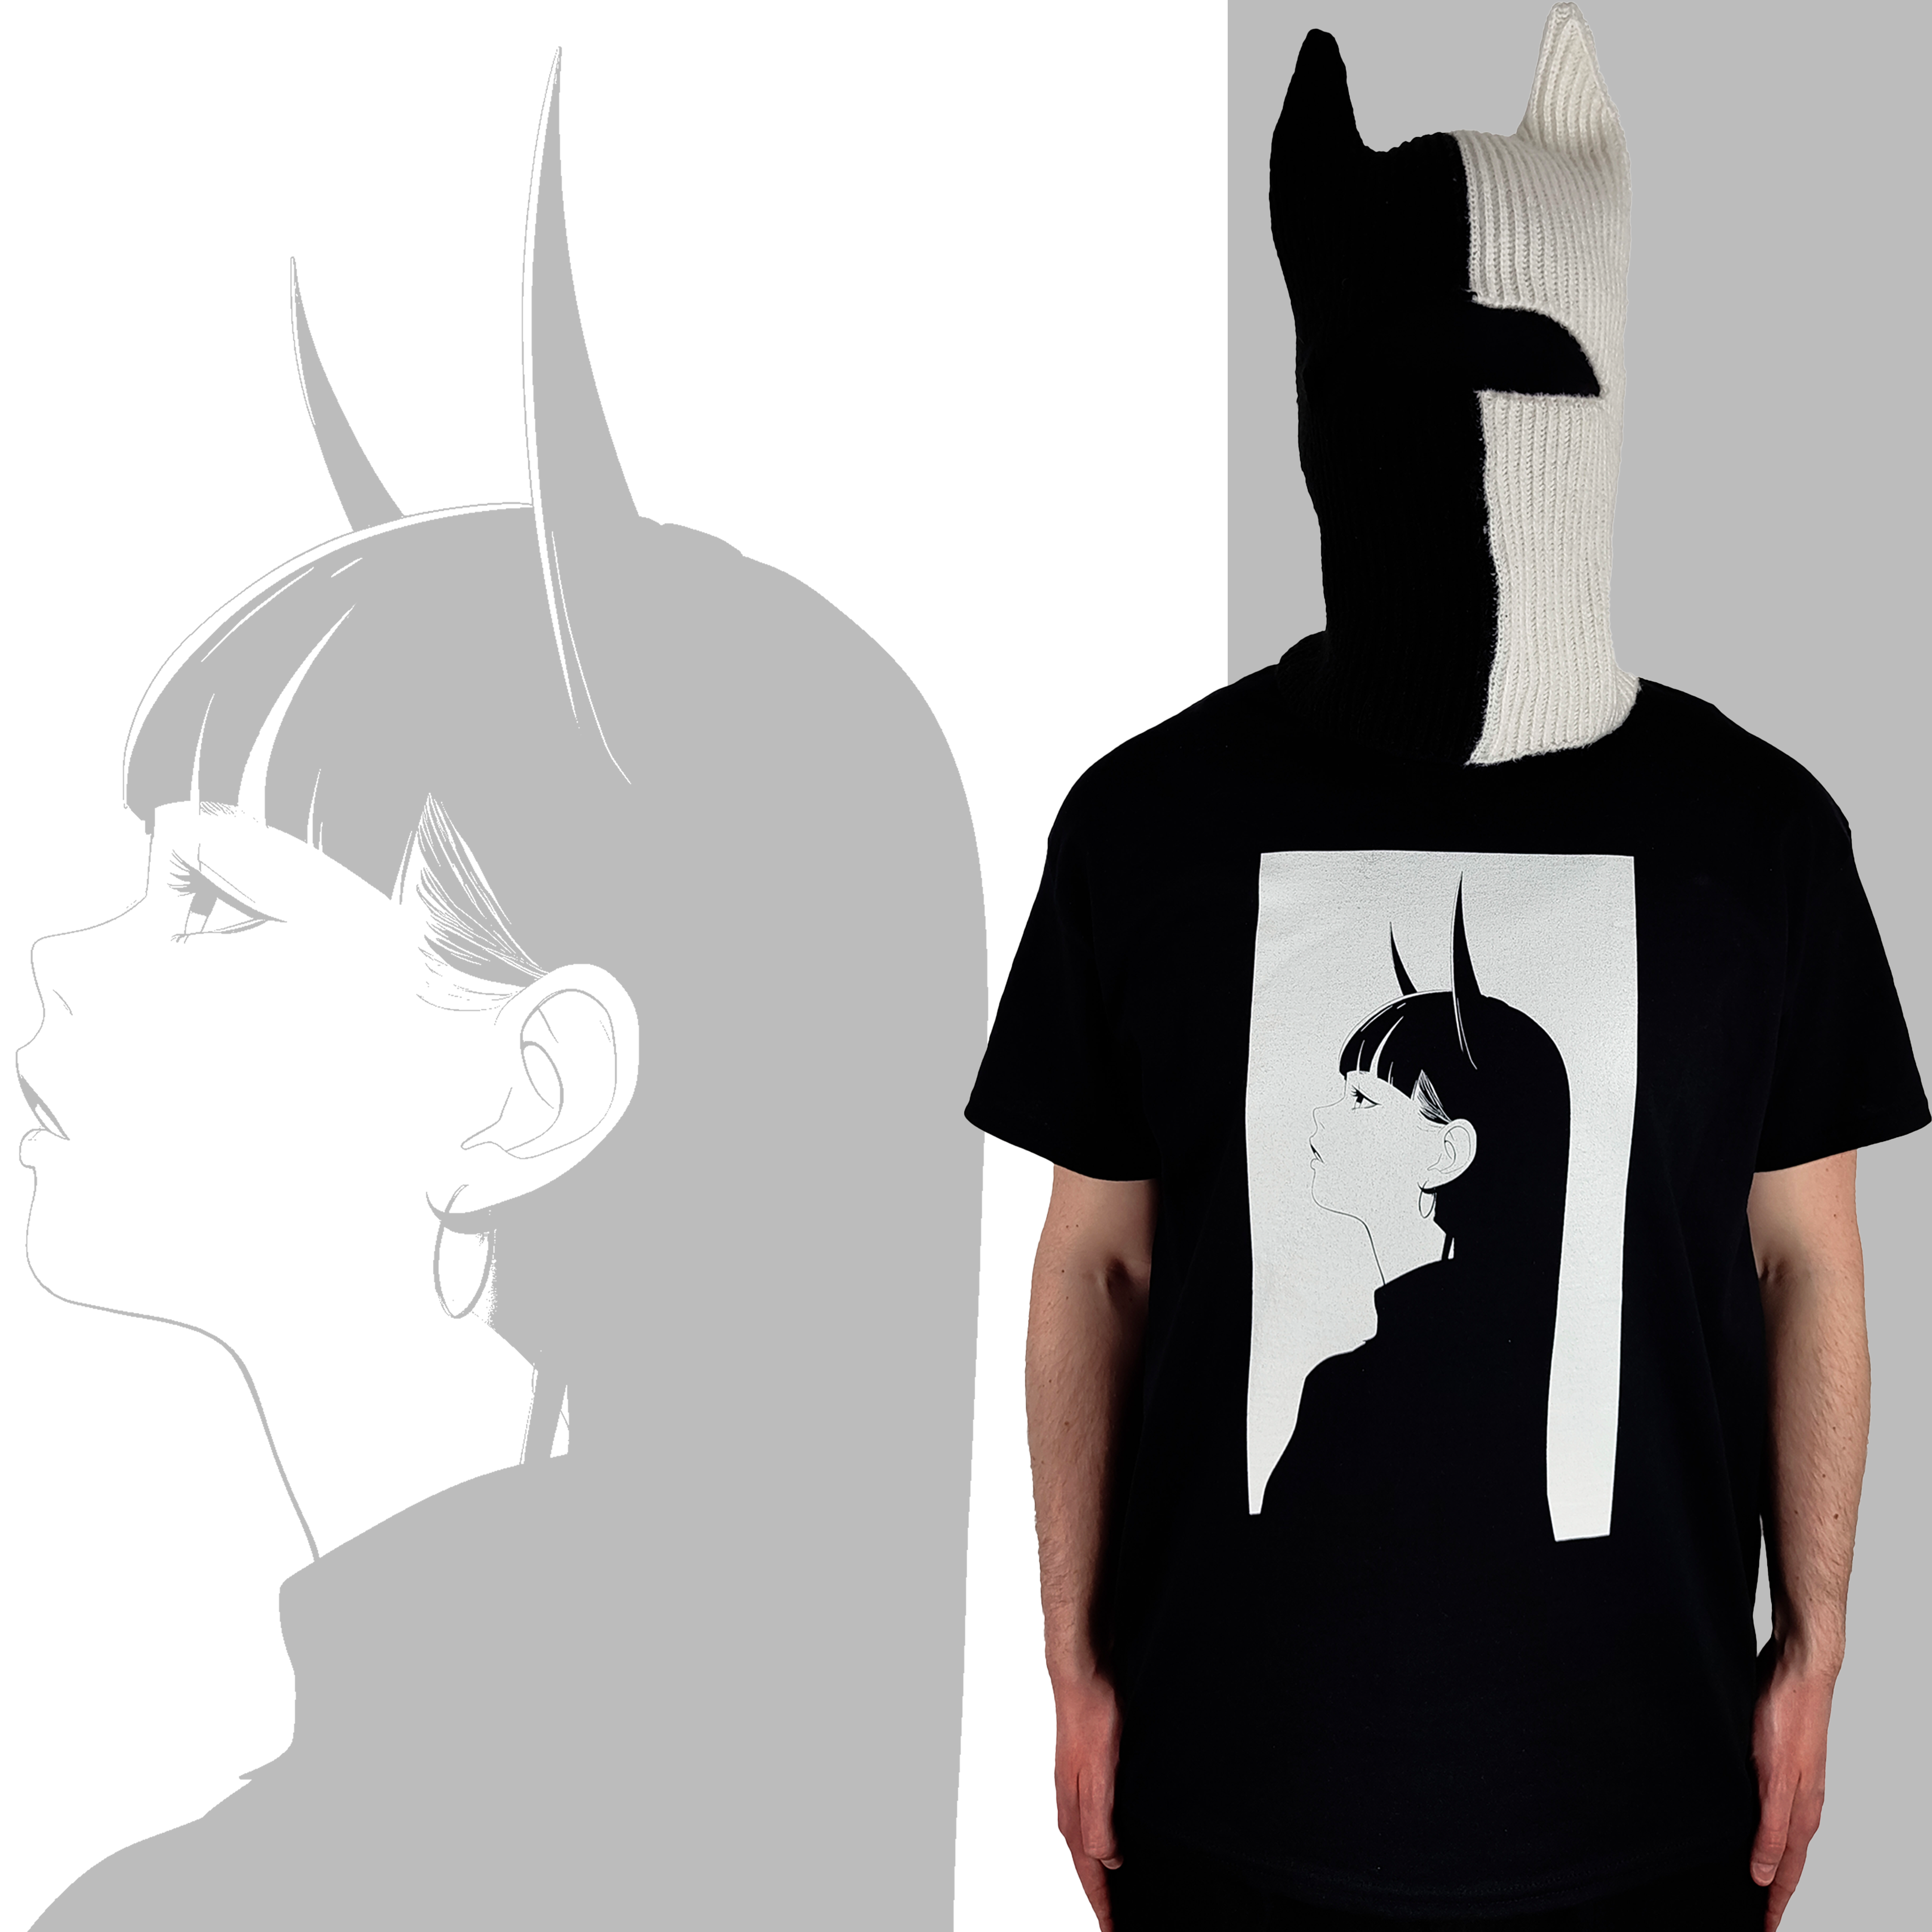 Person wearing a black T-shirt featuring a minimalist anime design of a girl with long hair and horns, with a matching black and white knitted mask with pointed ears, standing against a background displaying an enlarged version of the same anime design.